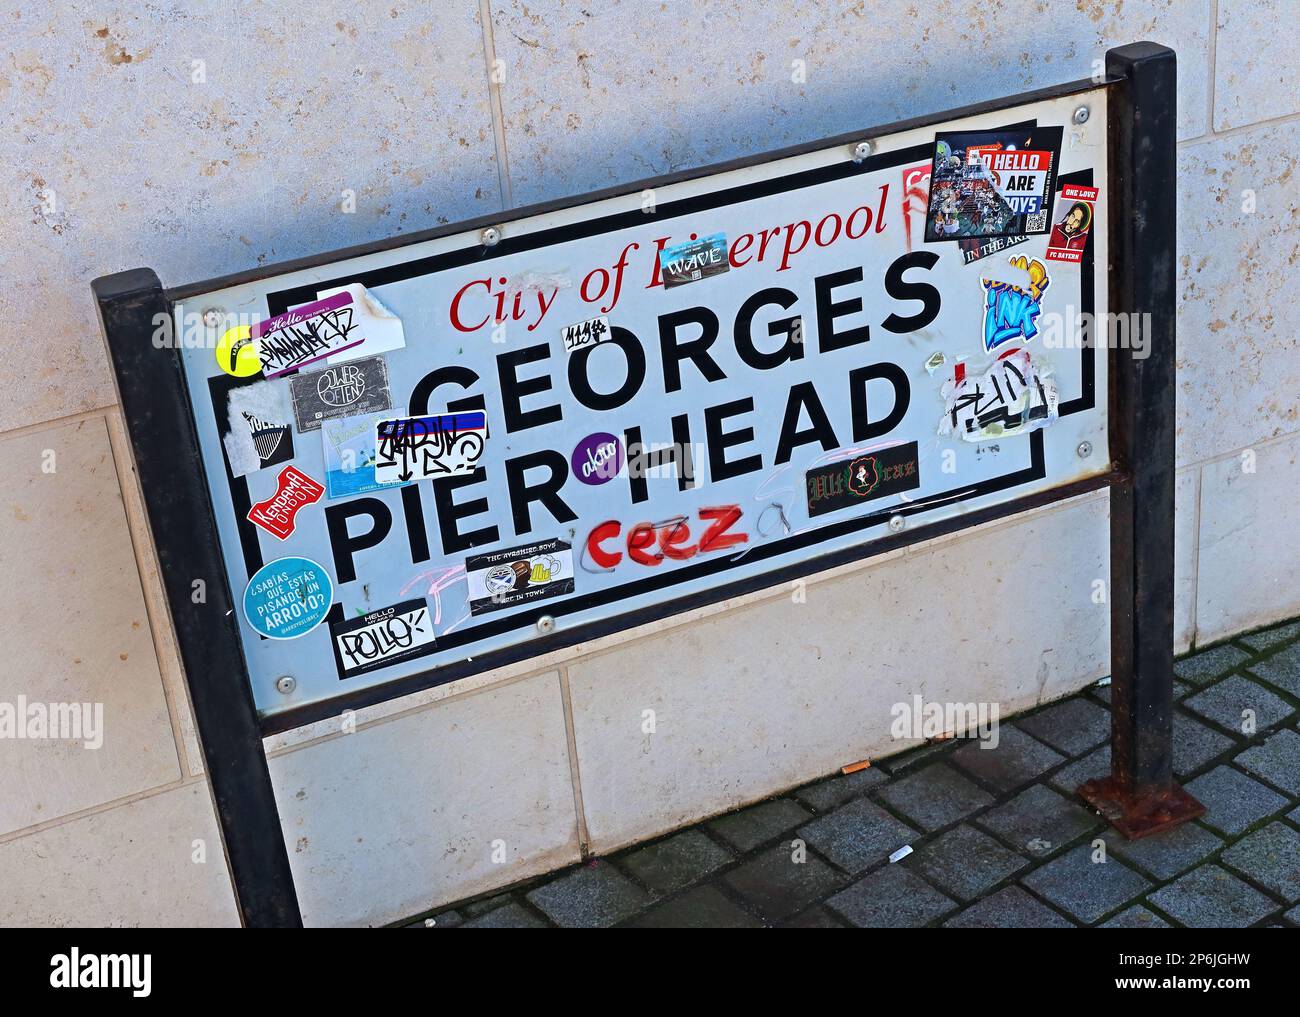 Georges Pier Head, City of Liverpool L3 sign, River Mersey, Merseyside, England, UK, L3 1DP Stock Photo